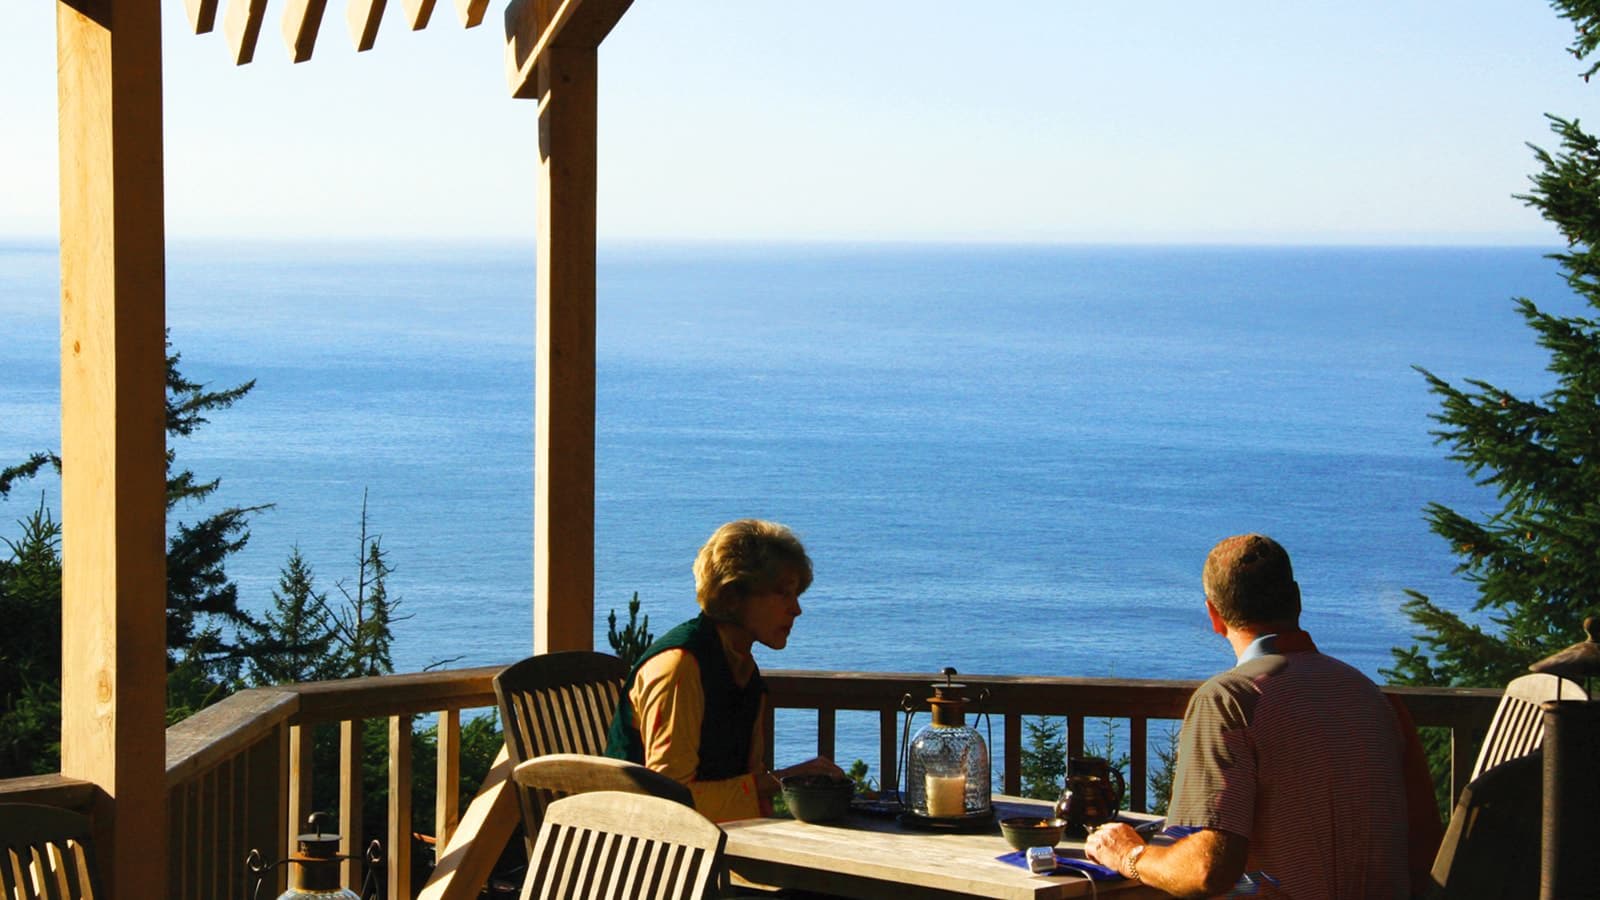 Man and woman sitting at wooden table overlooking the ocean in the background